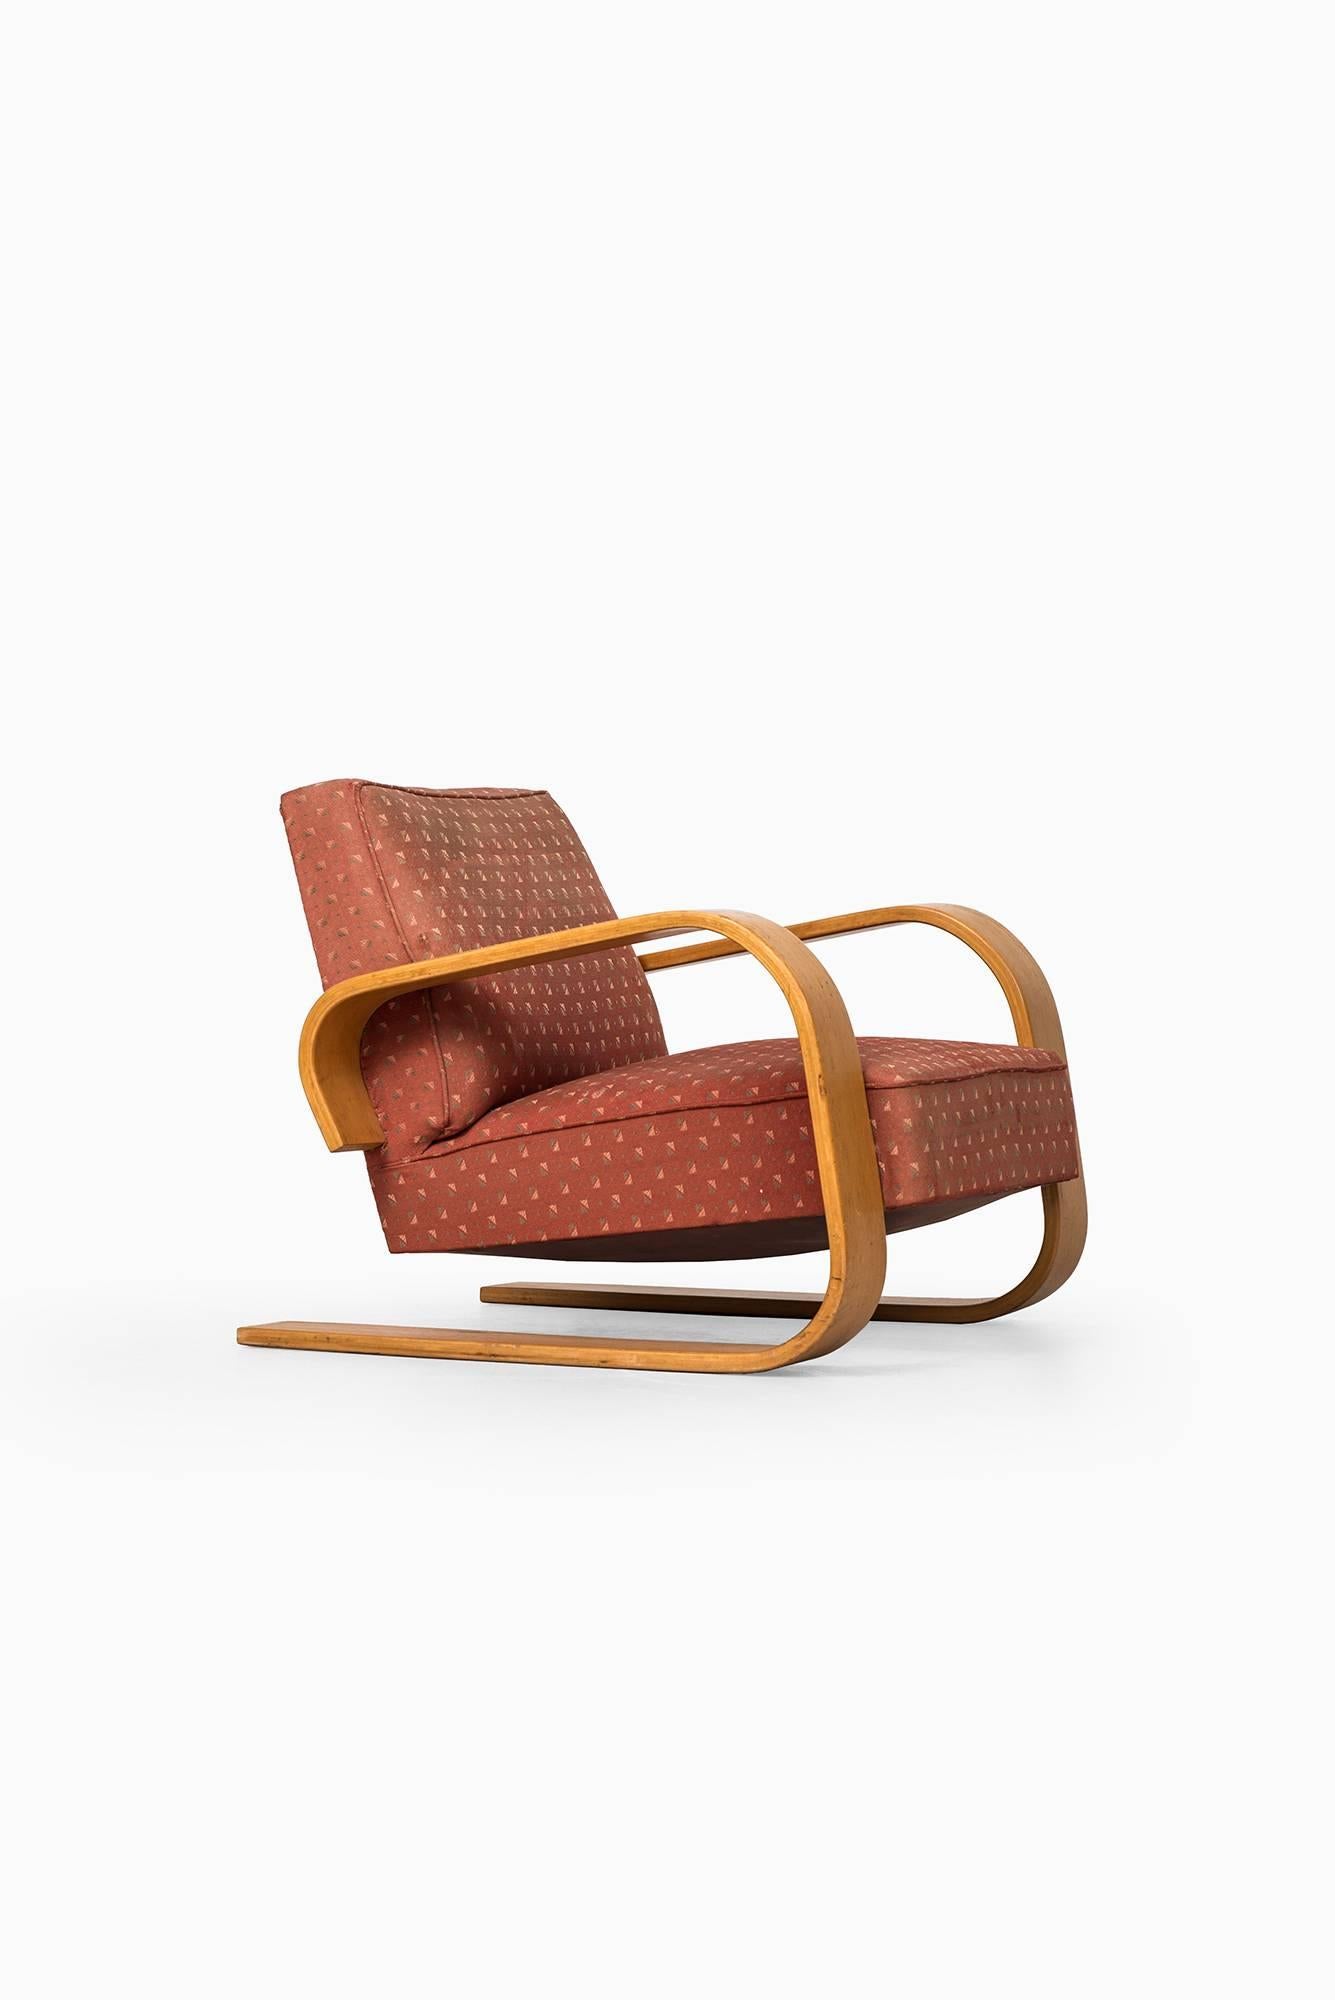 Rare easy chairs model 400 / the tank chair designed by Alvar Aalto. Produced by Artek in Finland.